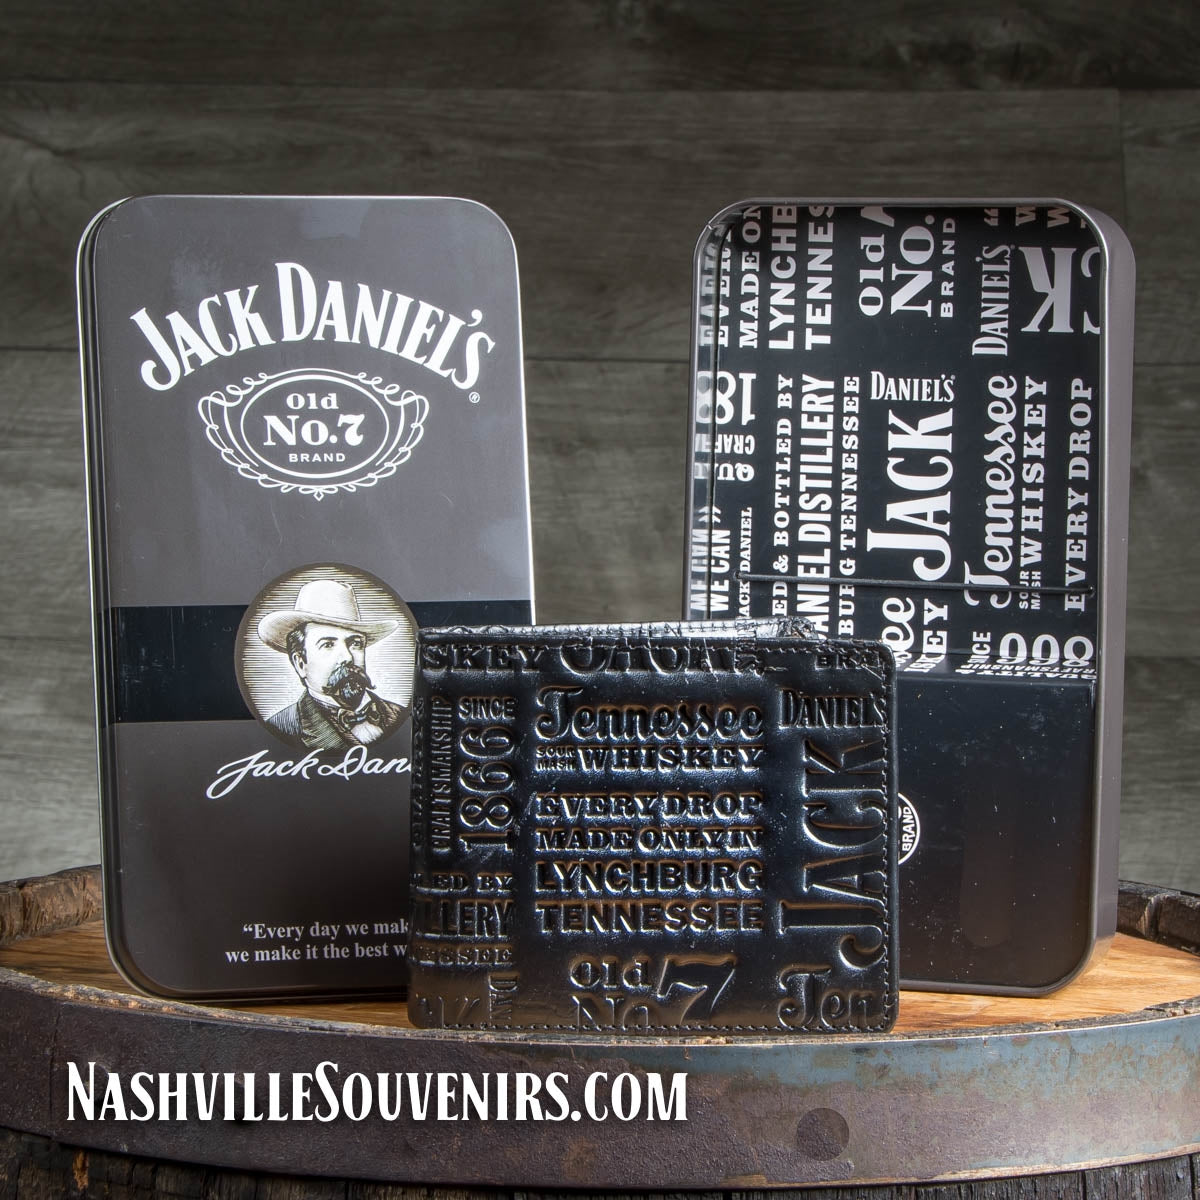 Jack Daniel's Lynchburg Logo Billfold. Get one today with FREE SHIPPING on all US orders over $75! One of for most popular designs featuring multiple Jack Daniel's logos.